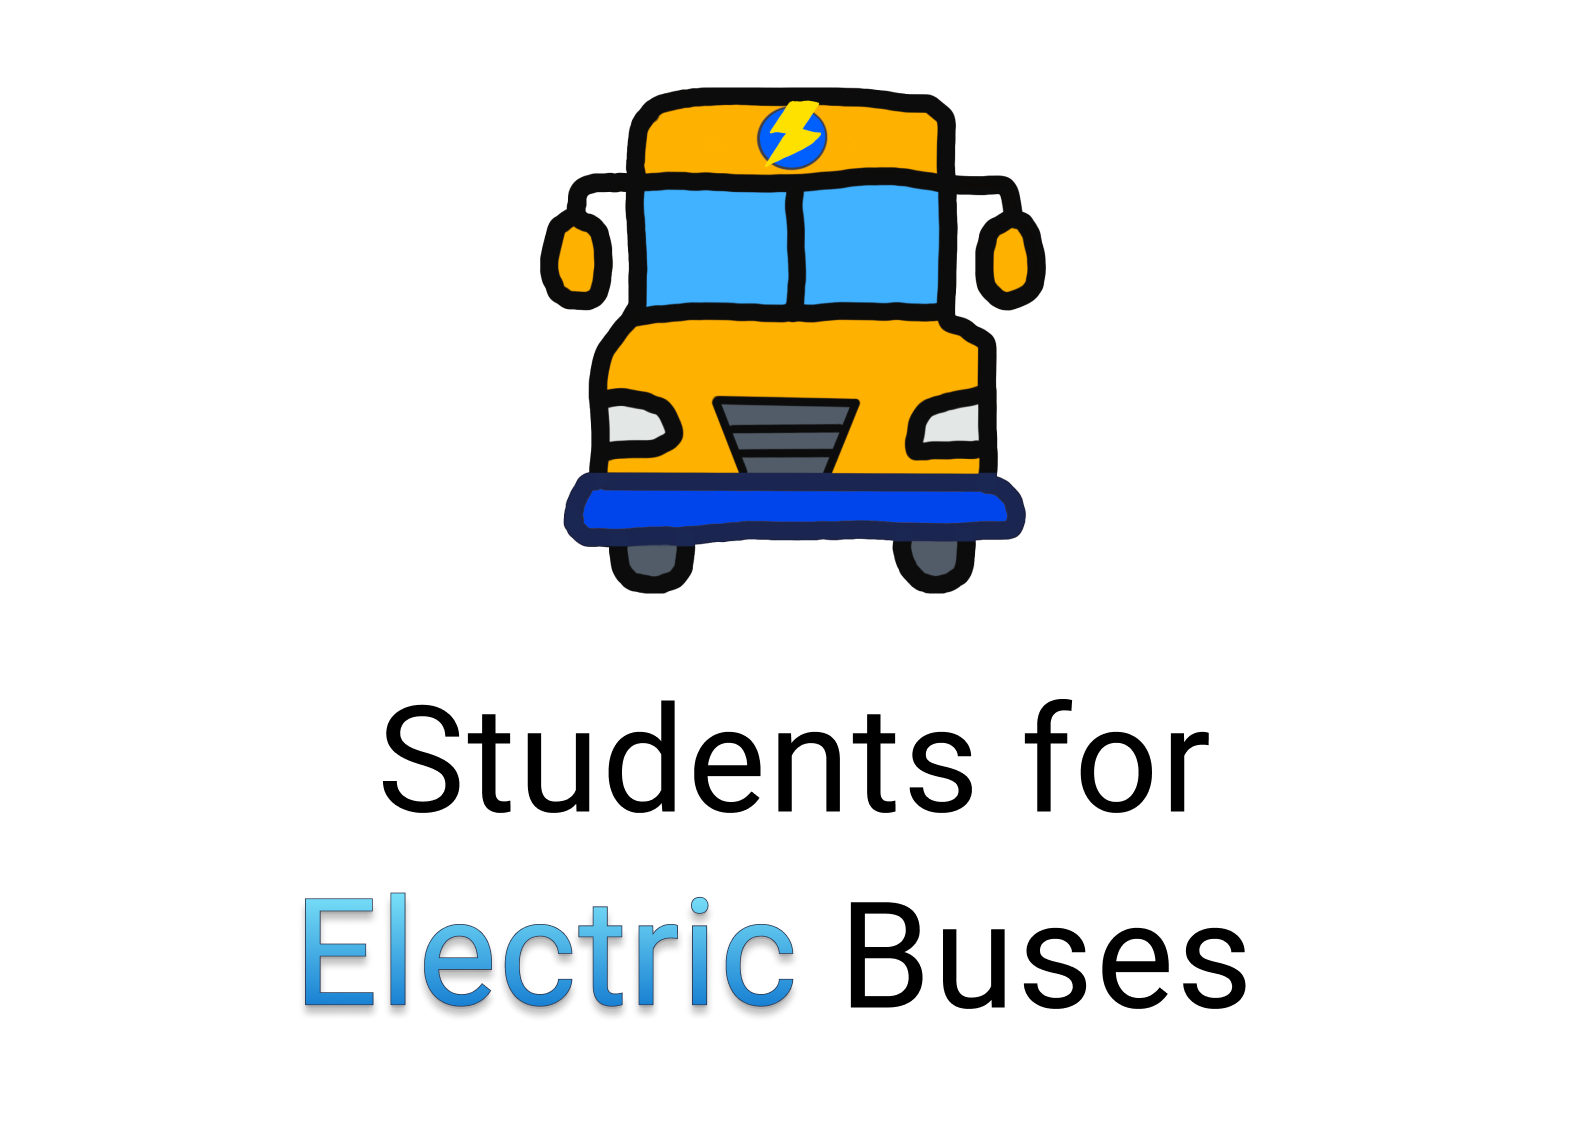 Students for Electric Buses product rendering